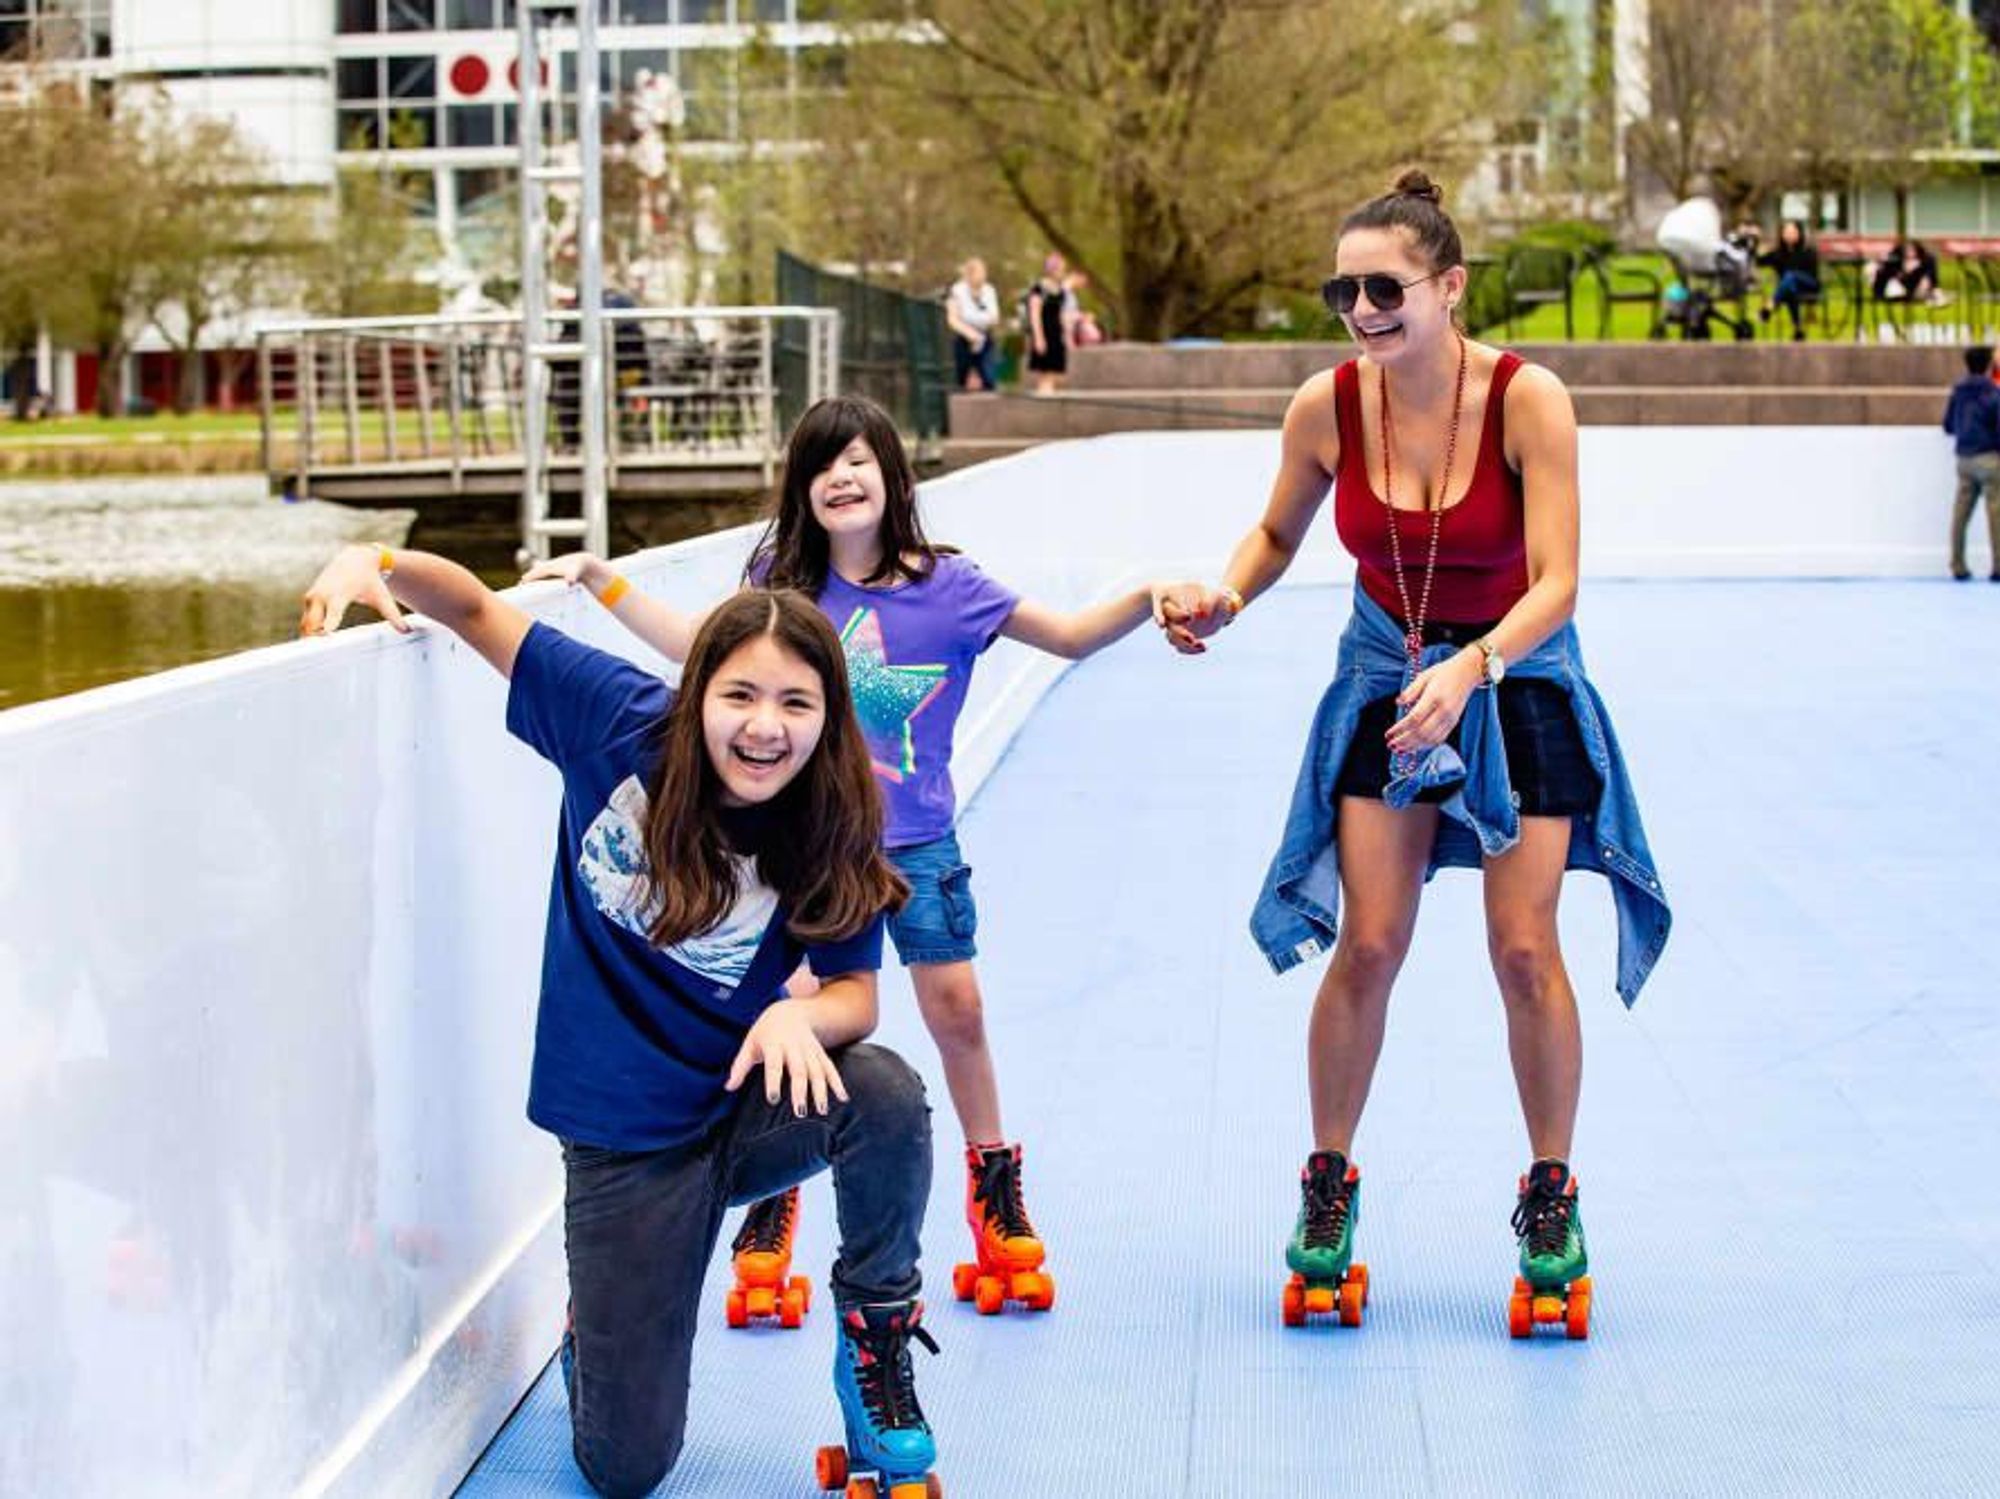 The Rink Discovery Green Houston skate